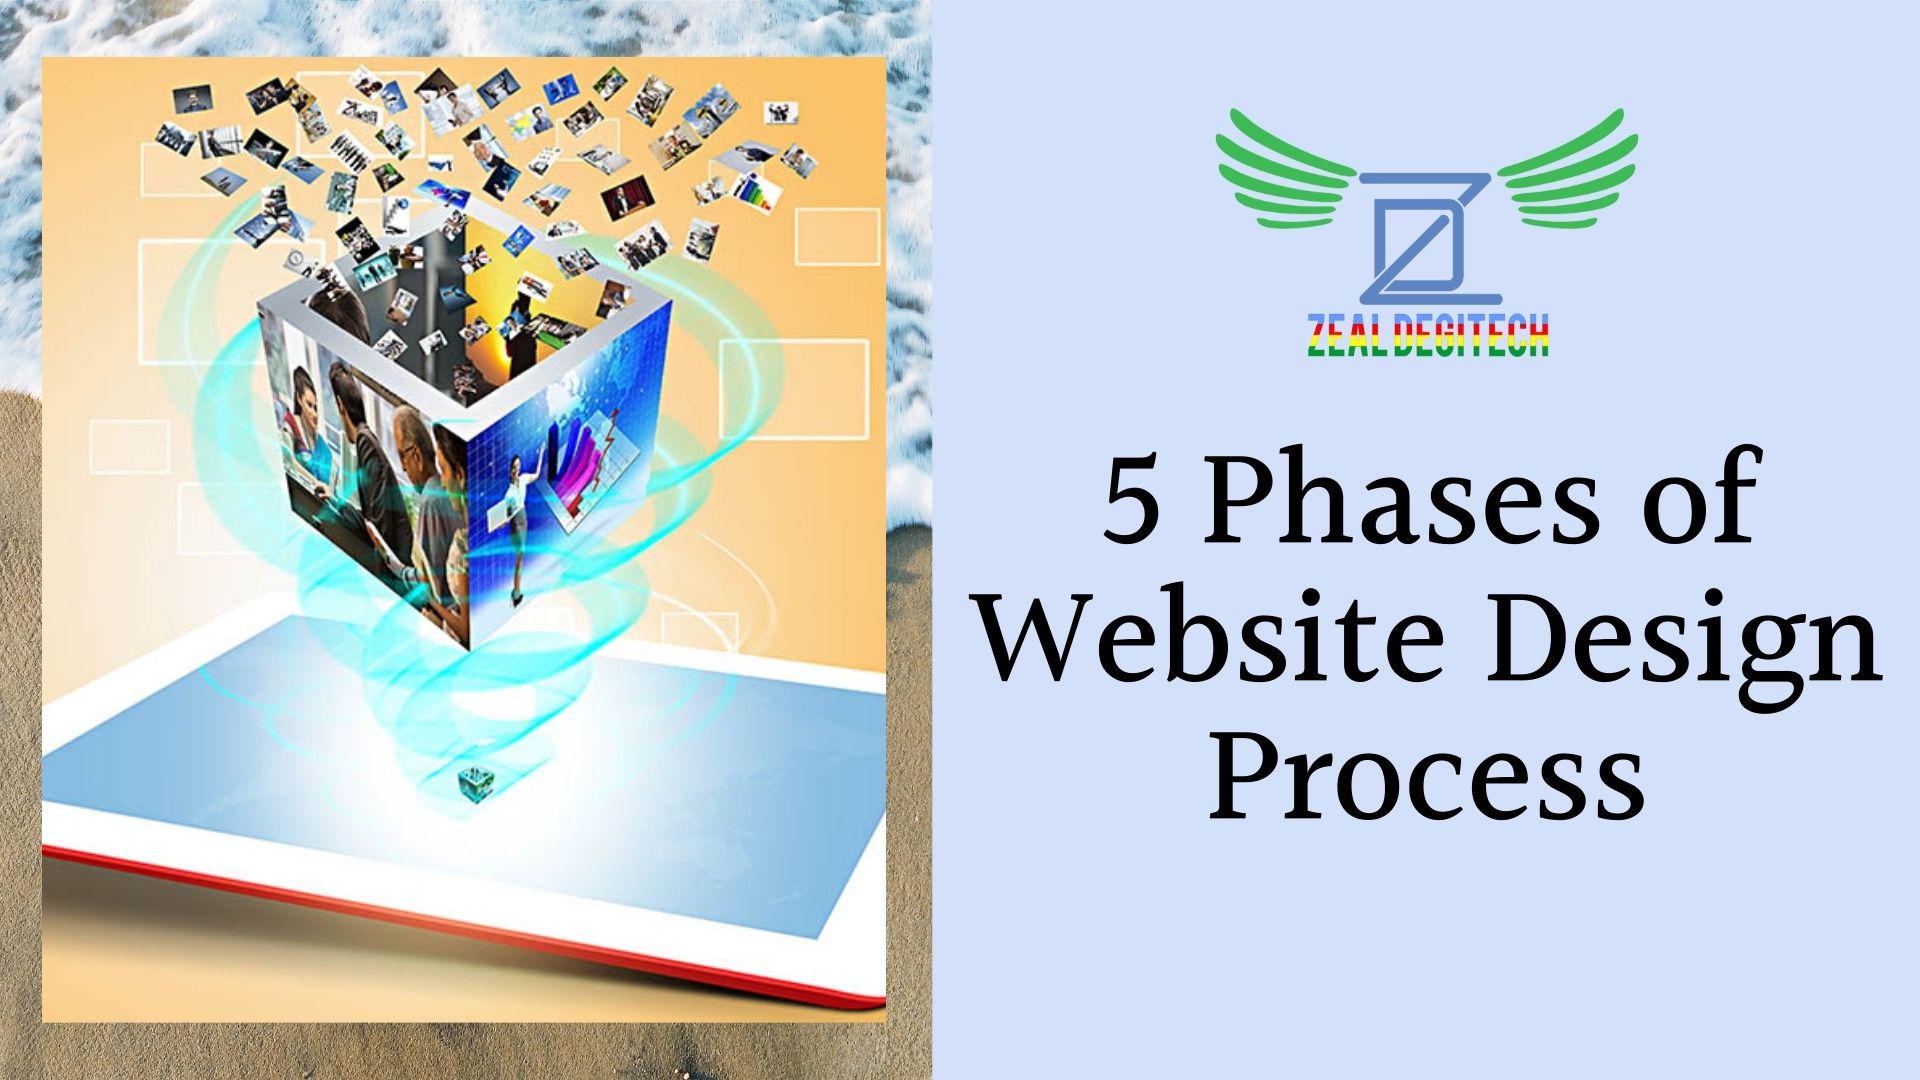 5 Phases of Website Design Process